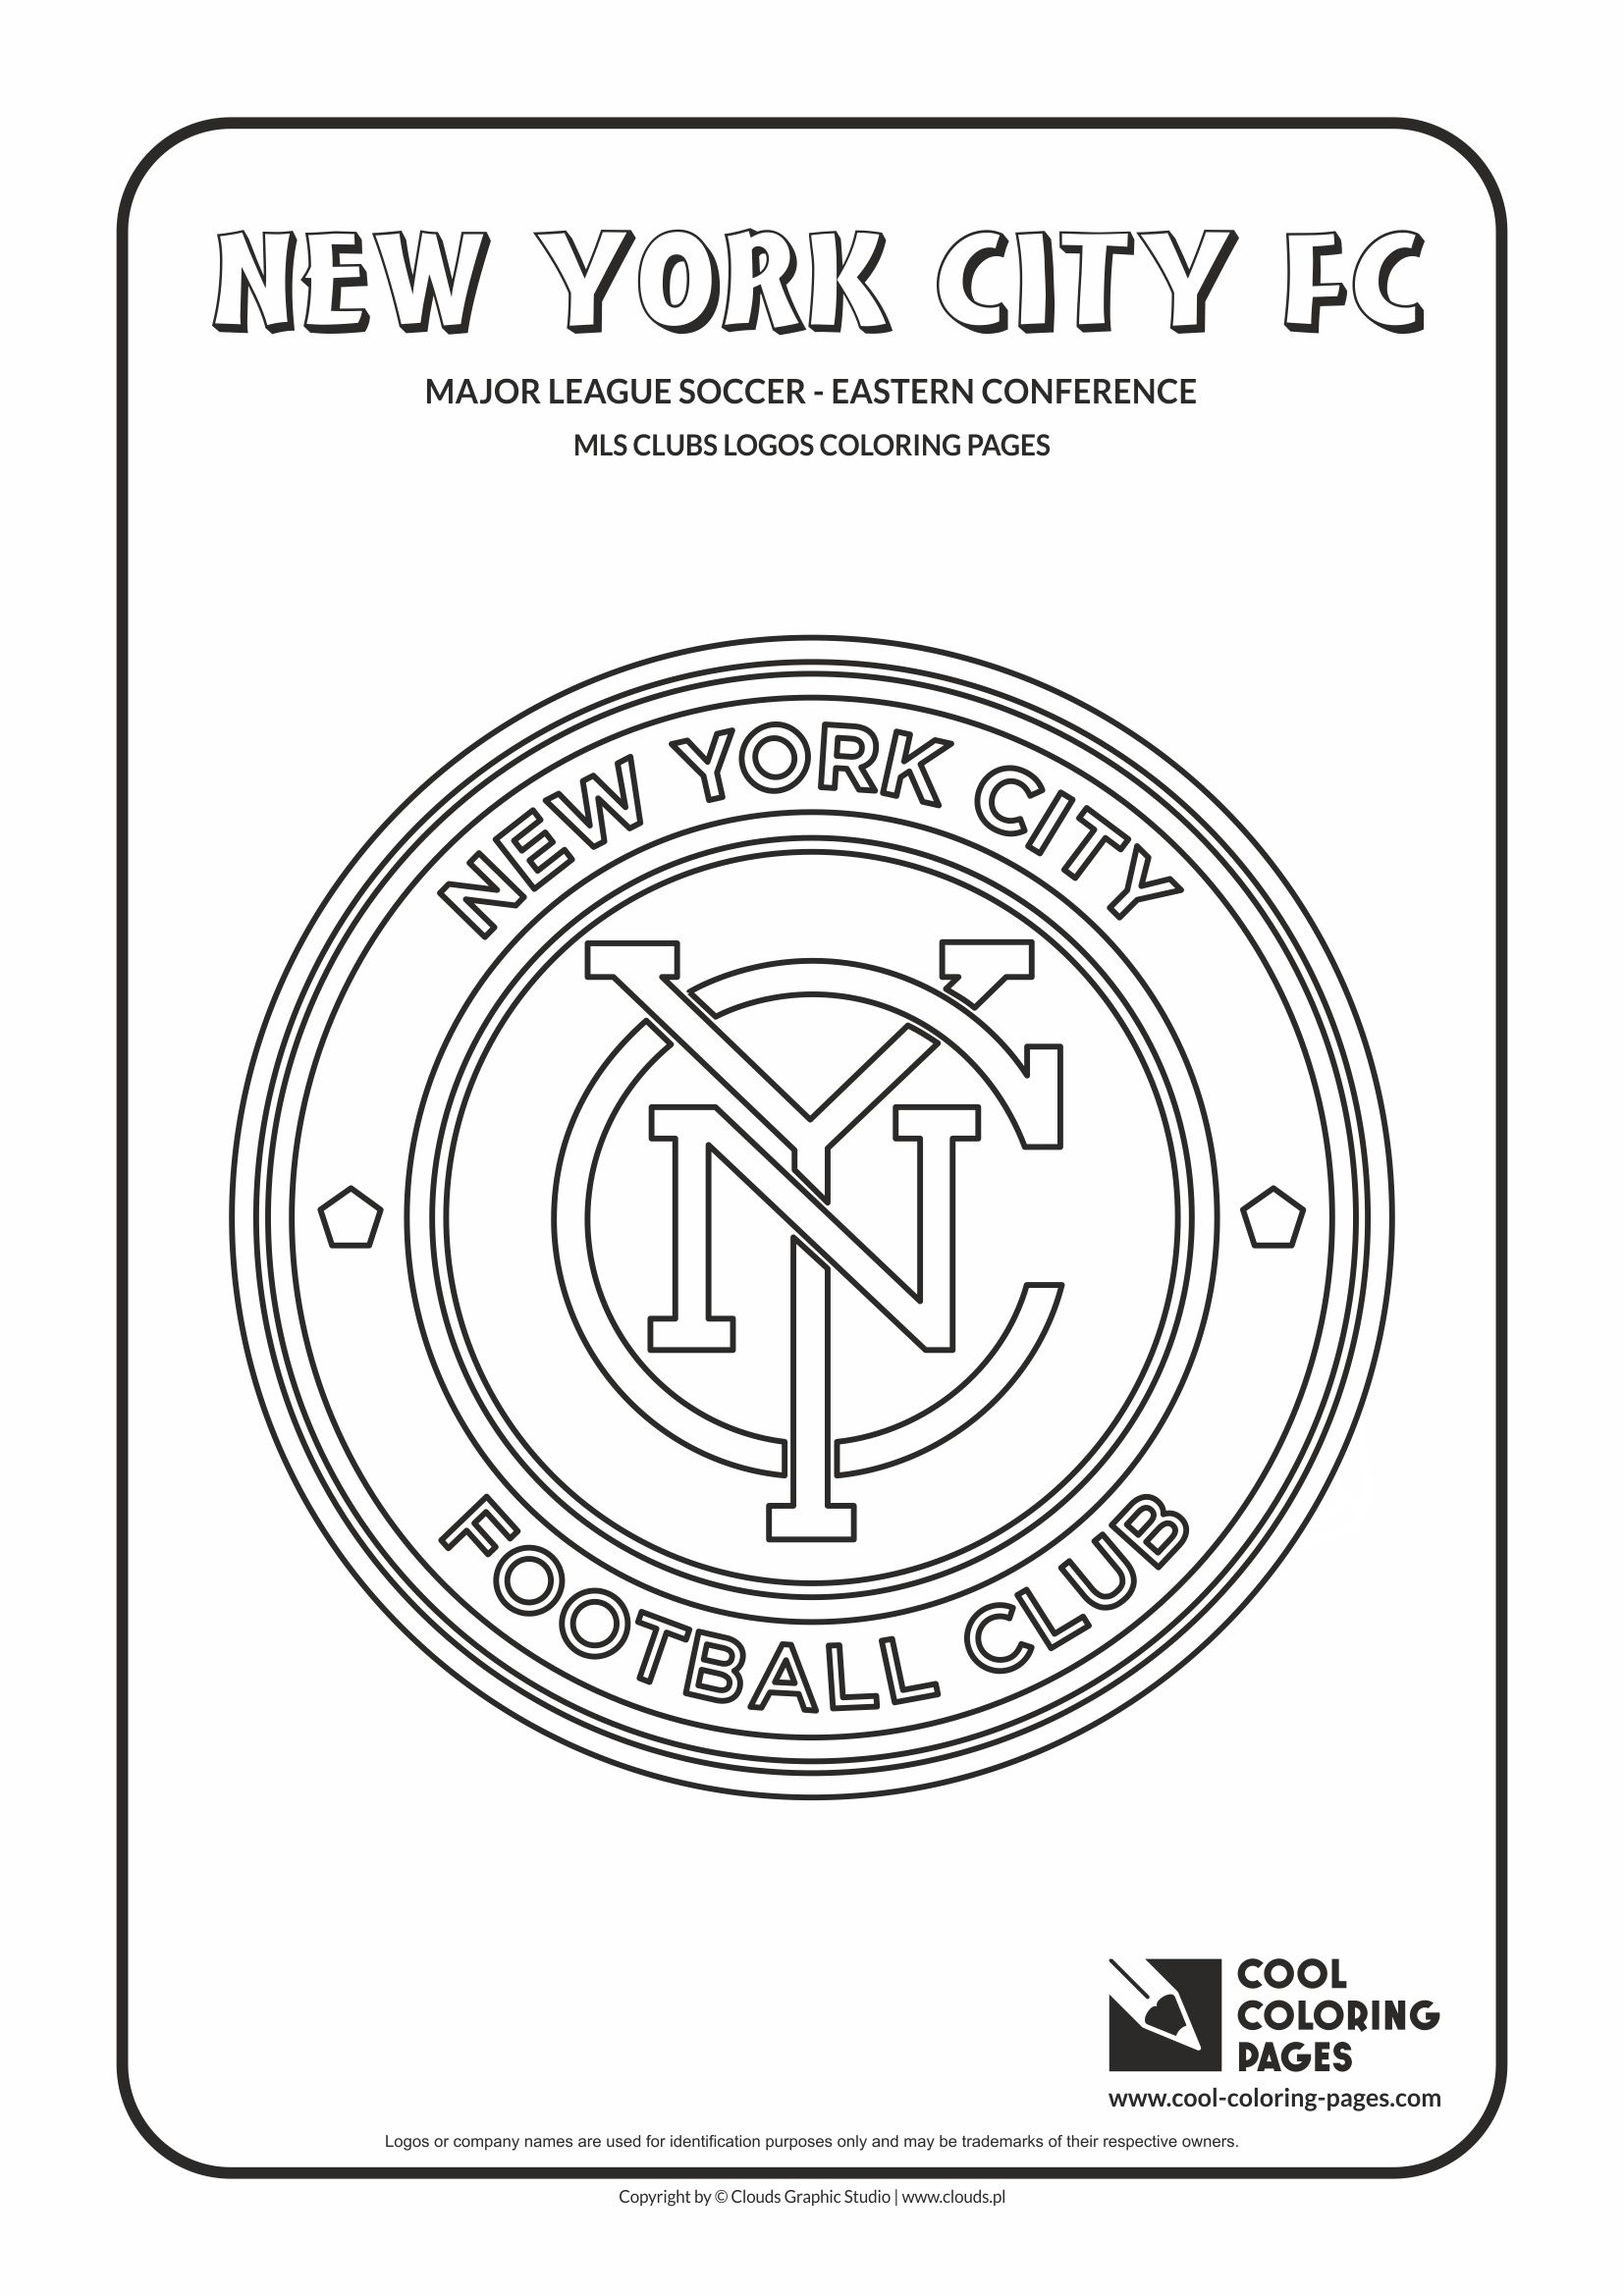 Cool Coloring Pages - Major League Soccer Logos - Eastern Conference / New York City FC logo / Coloring page with New York City FC logo